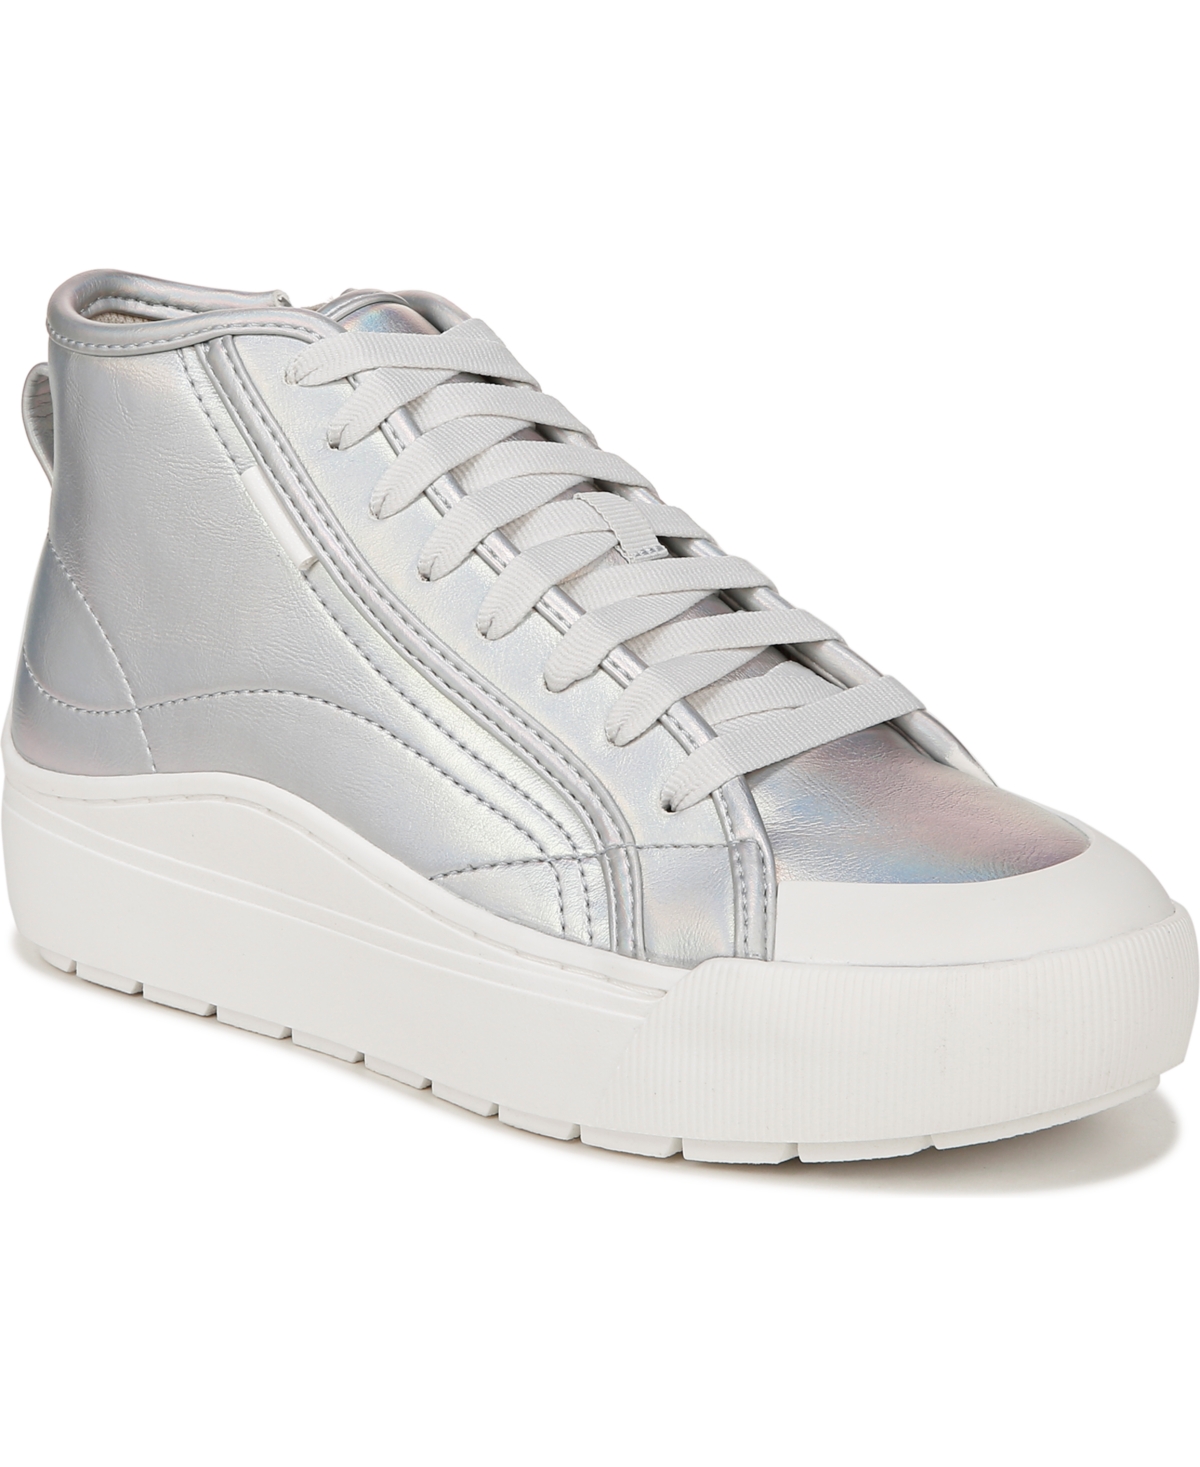 Shop Dr. Scholl's Women's Time Off Hi2 Platform Sneakers In Metallic Silver Faux Leather